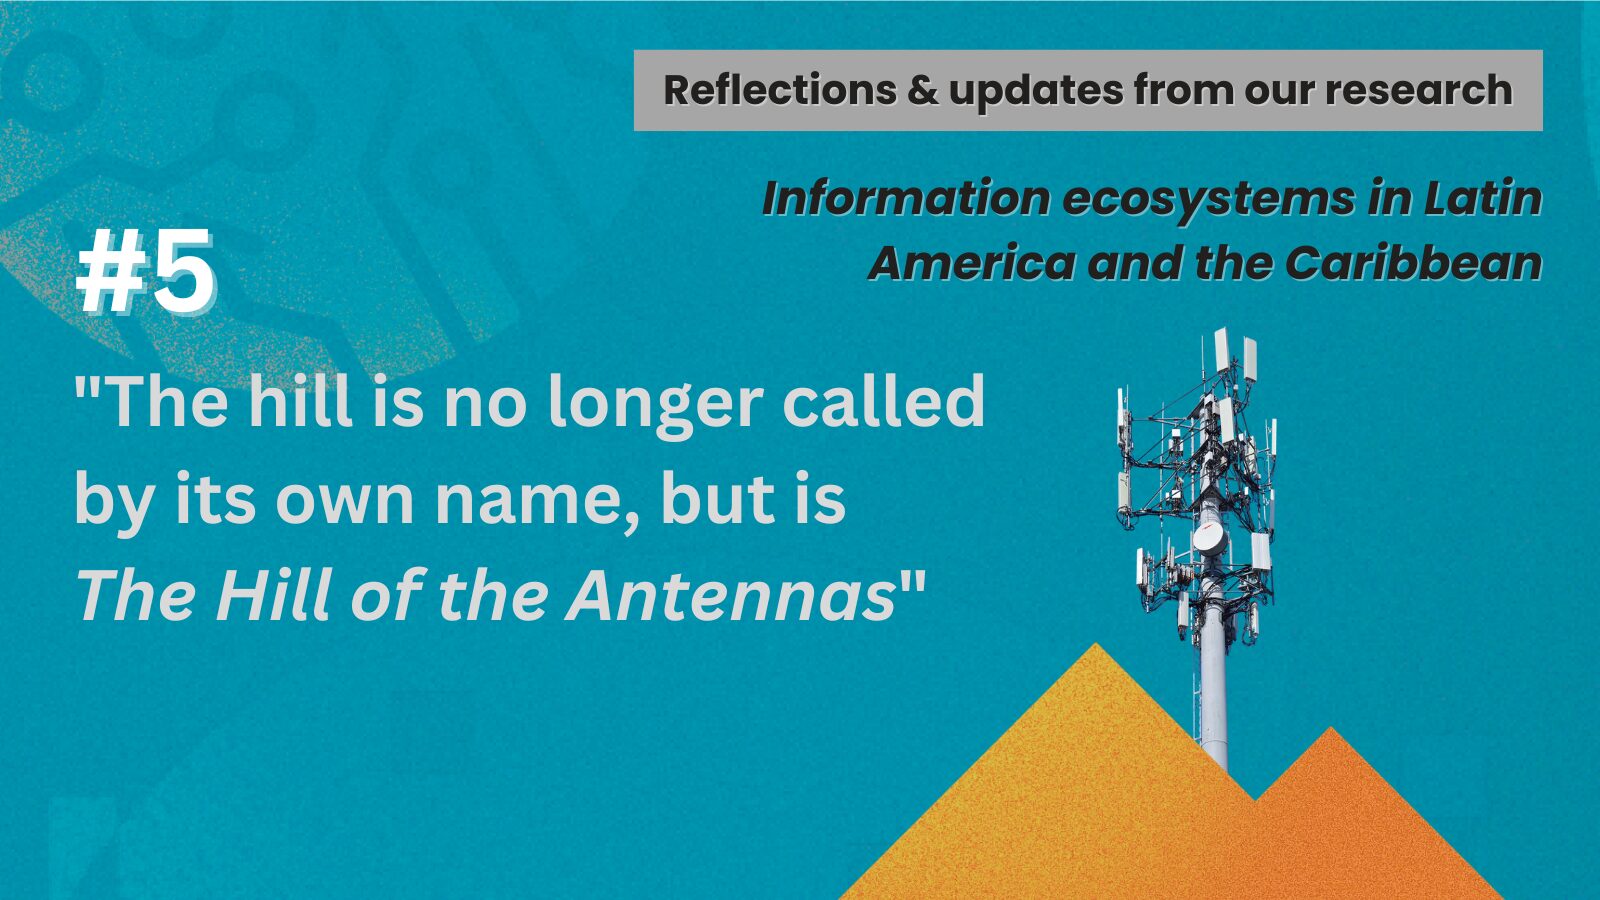 “The hill is no longer called by its own name, but is ‘The Hill of the Antennas’ “